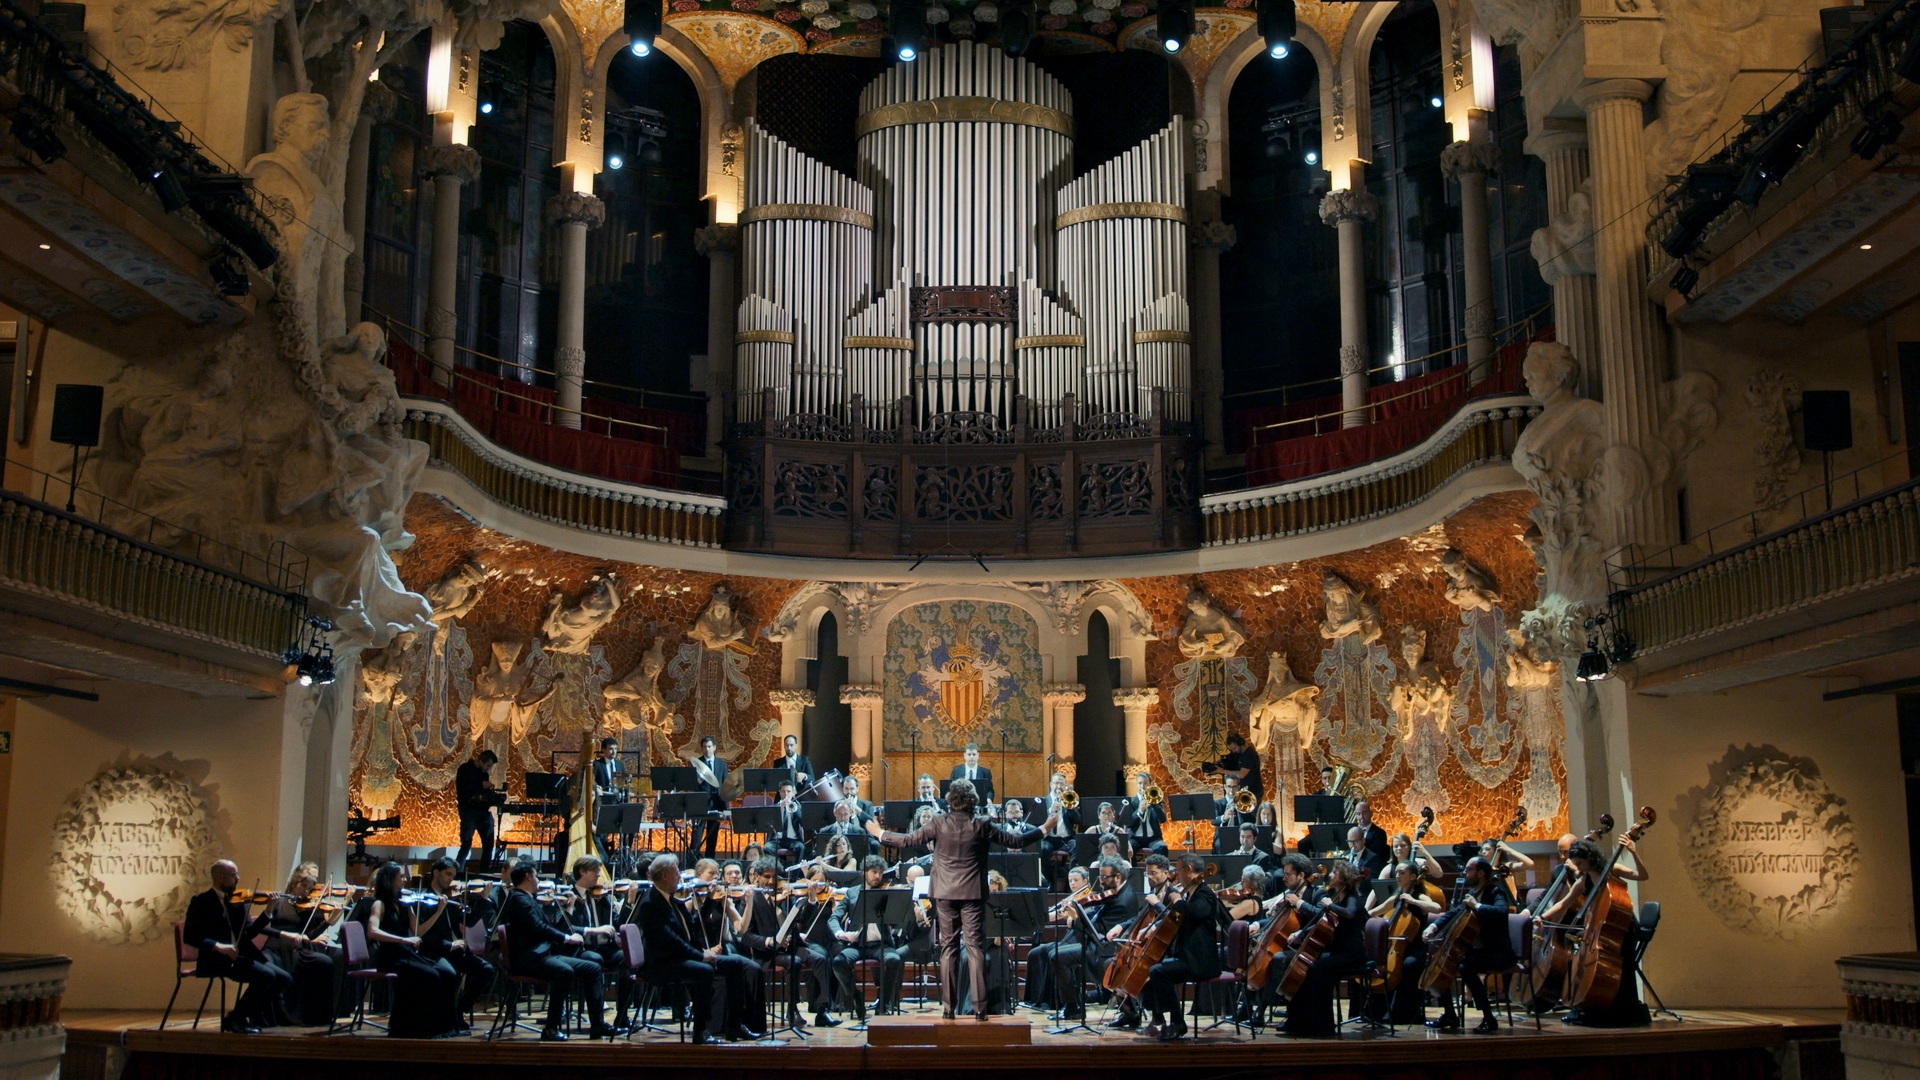 The performance took place in the Palau de la Musica Catalana. /CMG